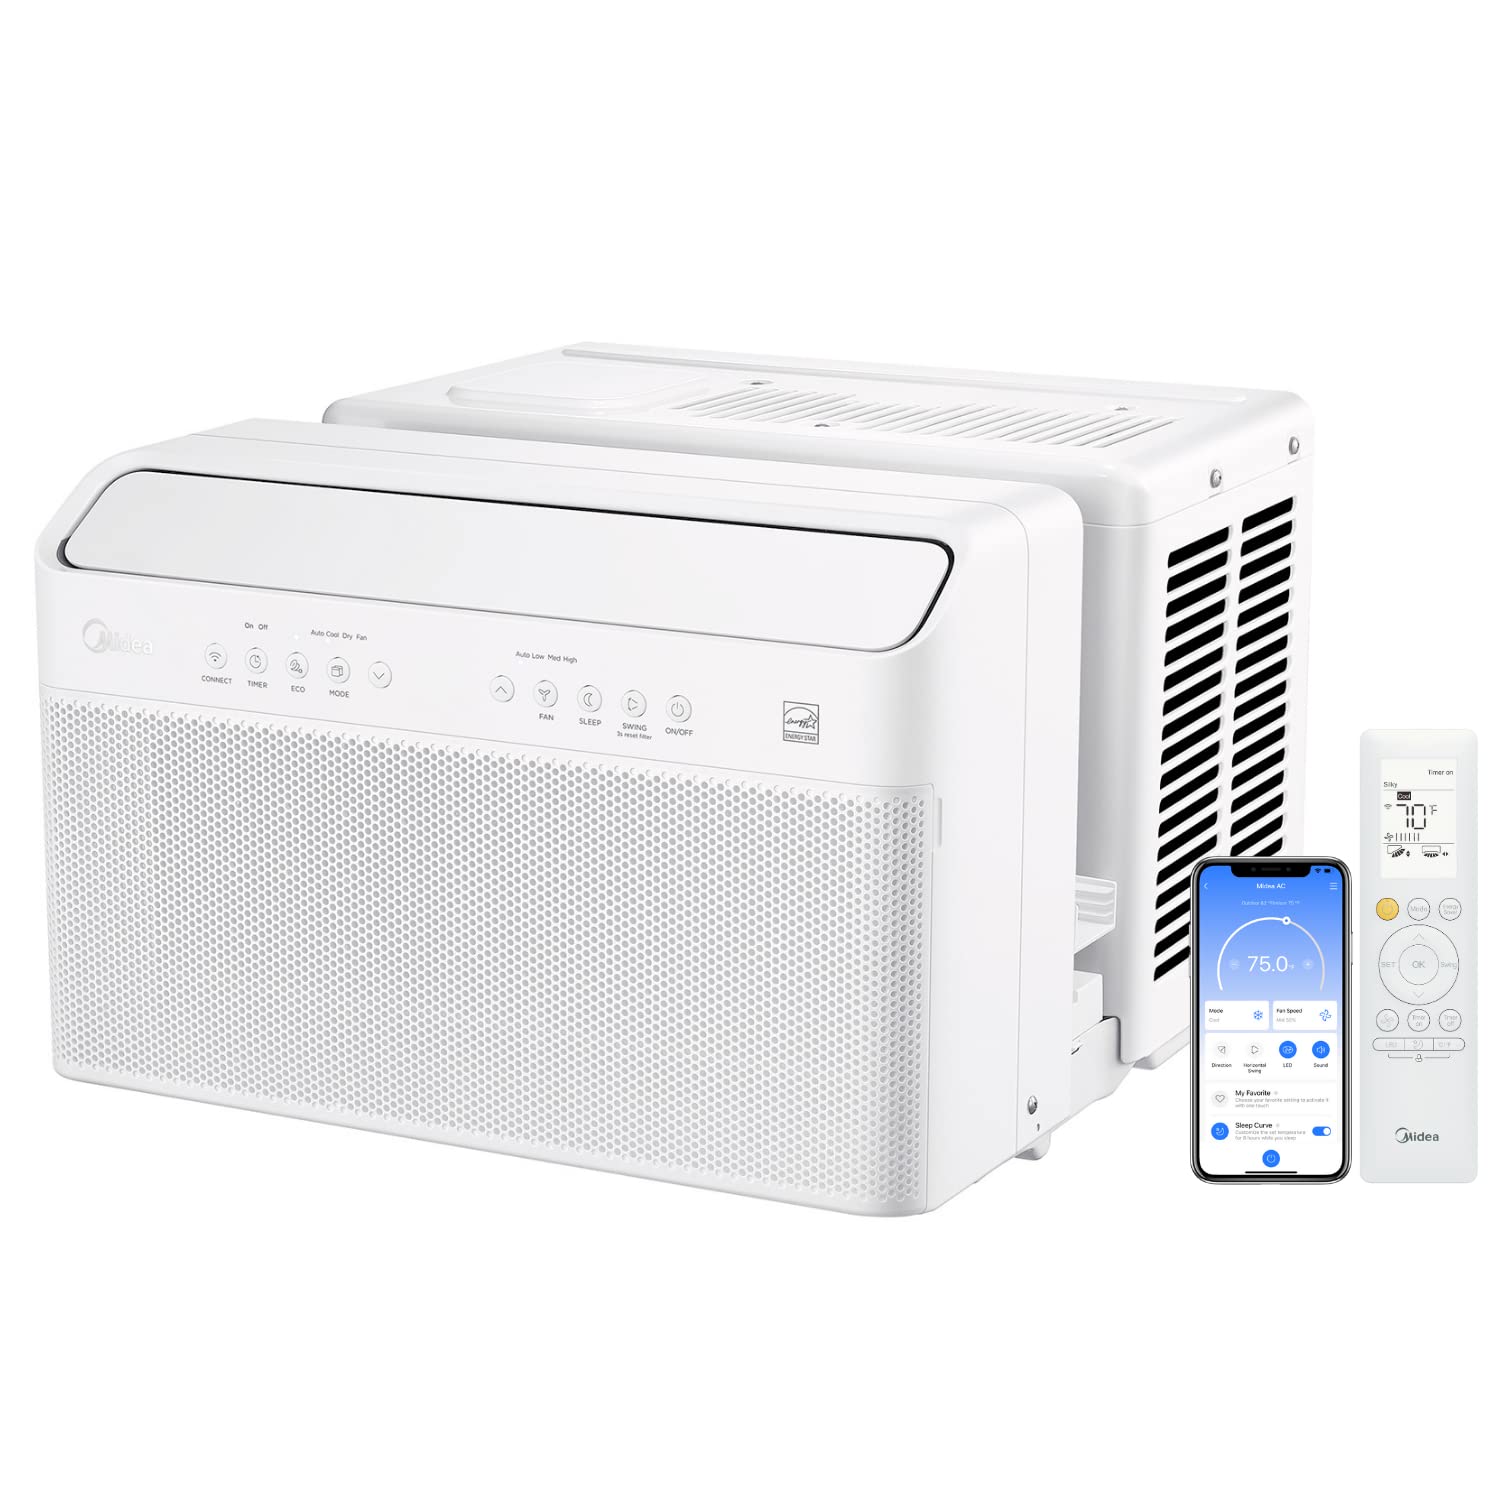 Midea 10,000 BTU U-Shaped Smart Inverter Window Air Conditioner-Cools up to 450 Sq. Ft., Ultra Quiet with Open Window Flexibilit